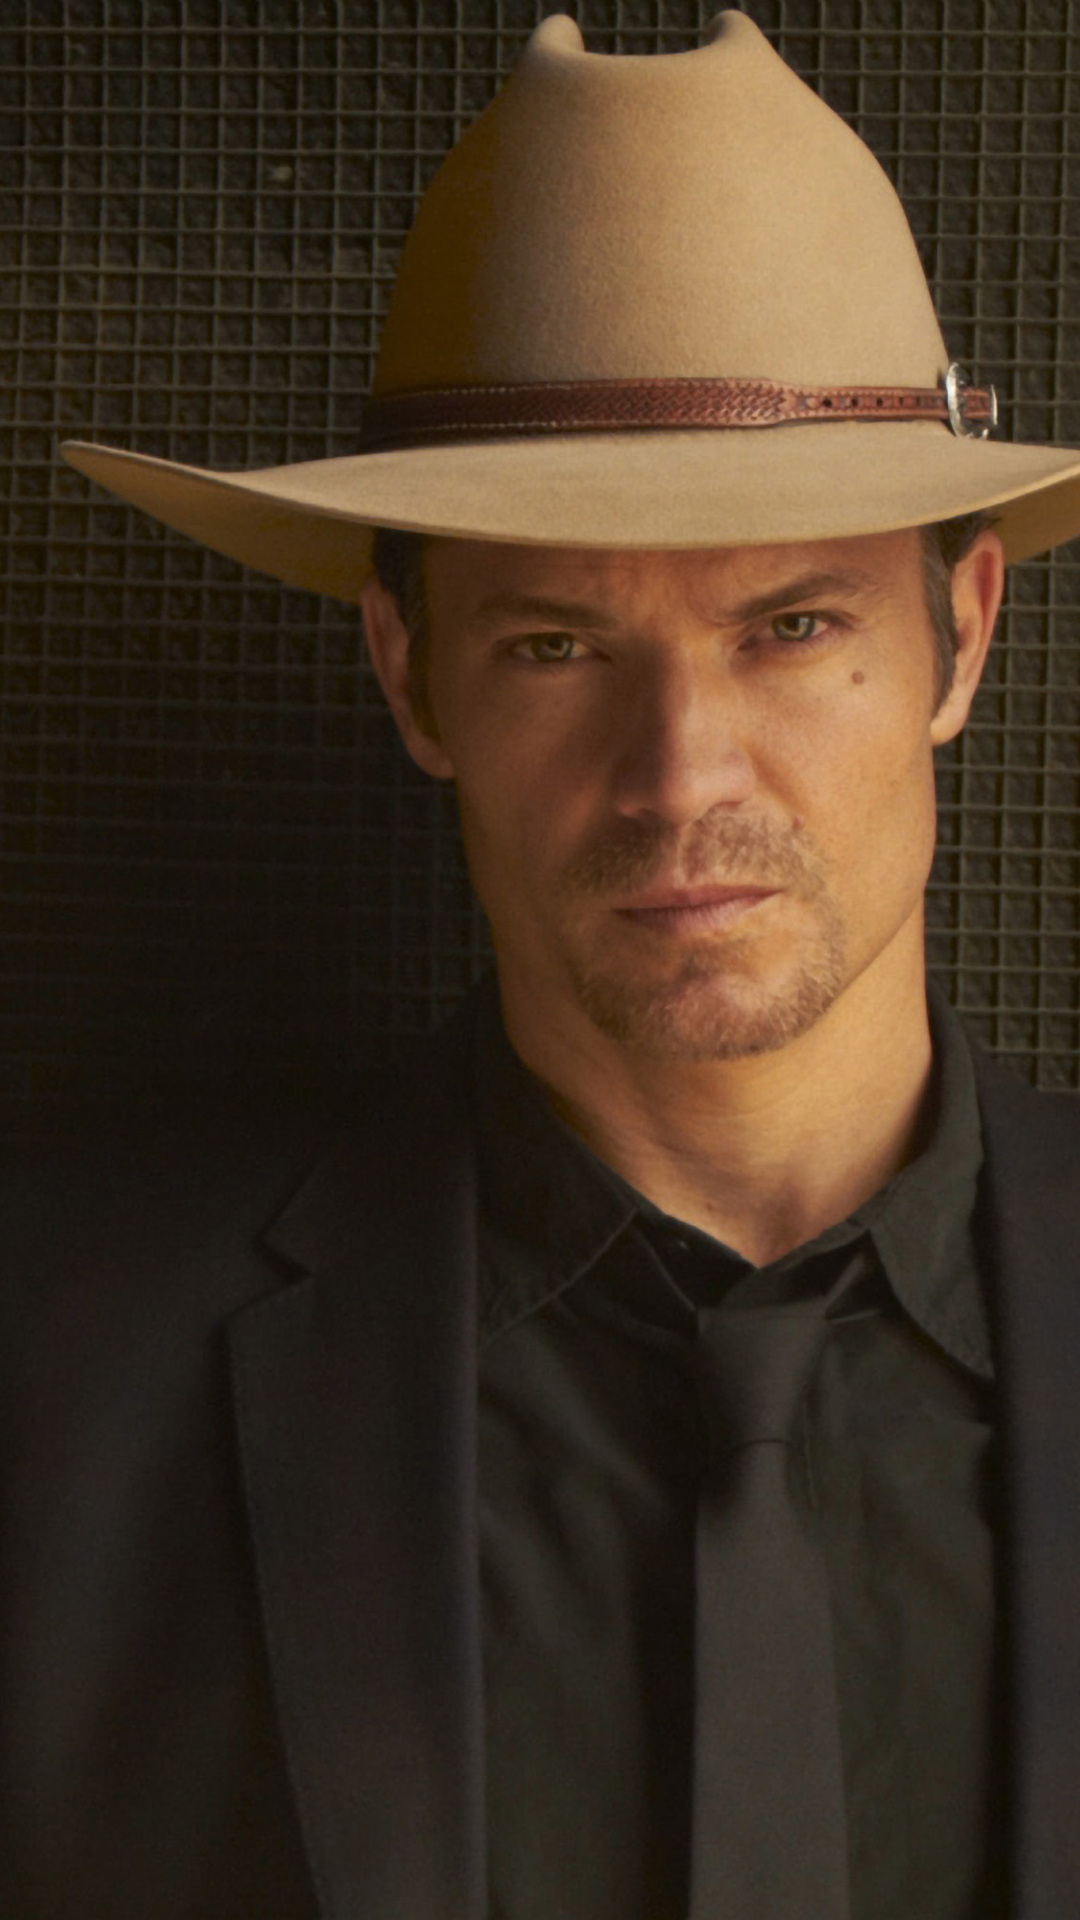 Justified TV Series, Timothy Olyphant interview, In-depth discussion, TV series analysis, 1080x1920 Full HD Handy